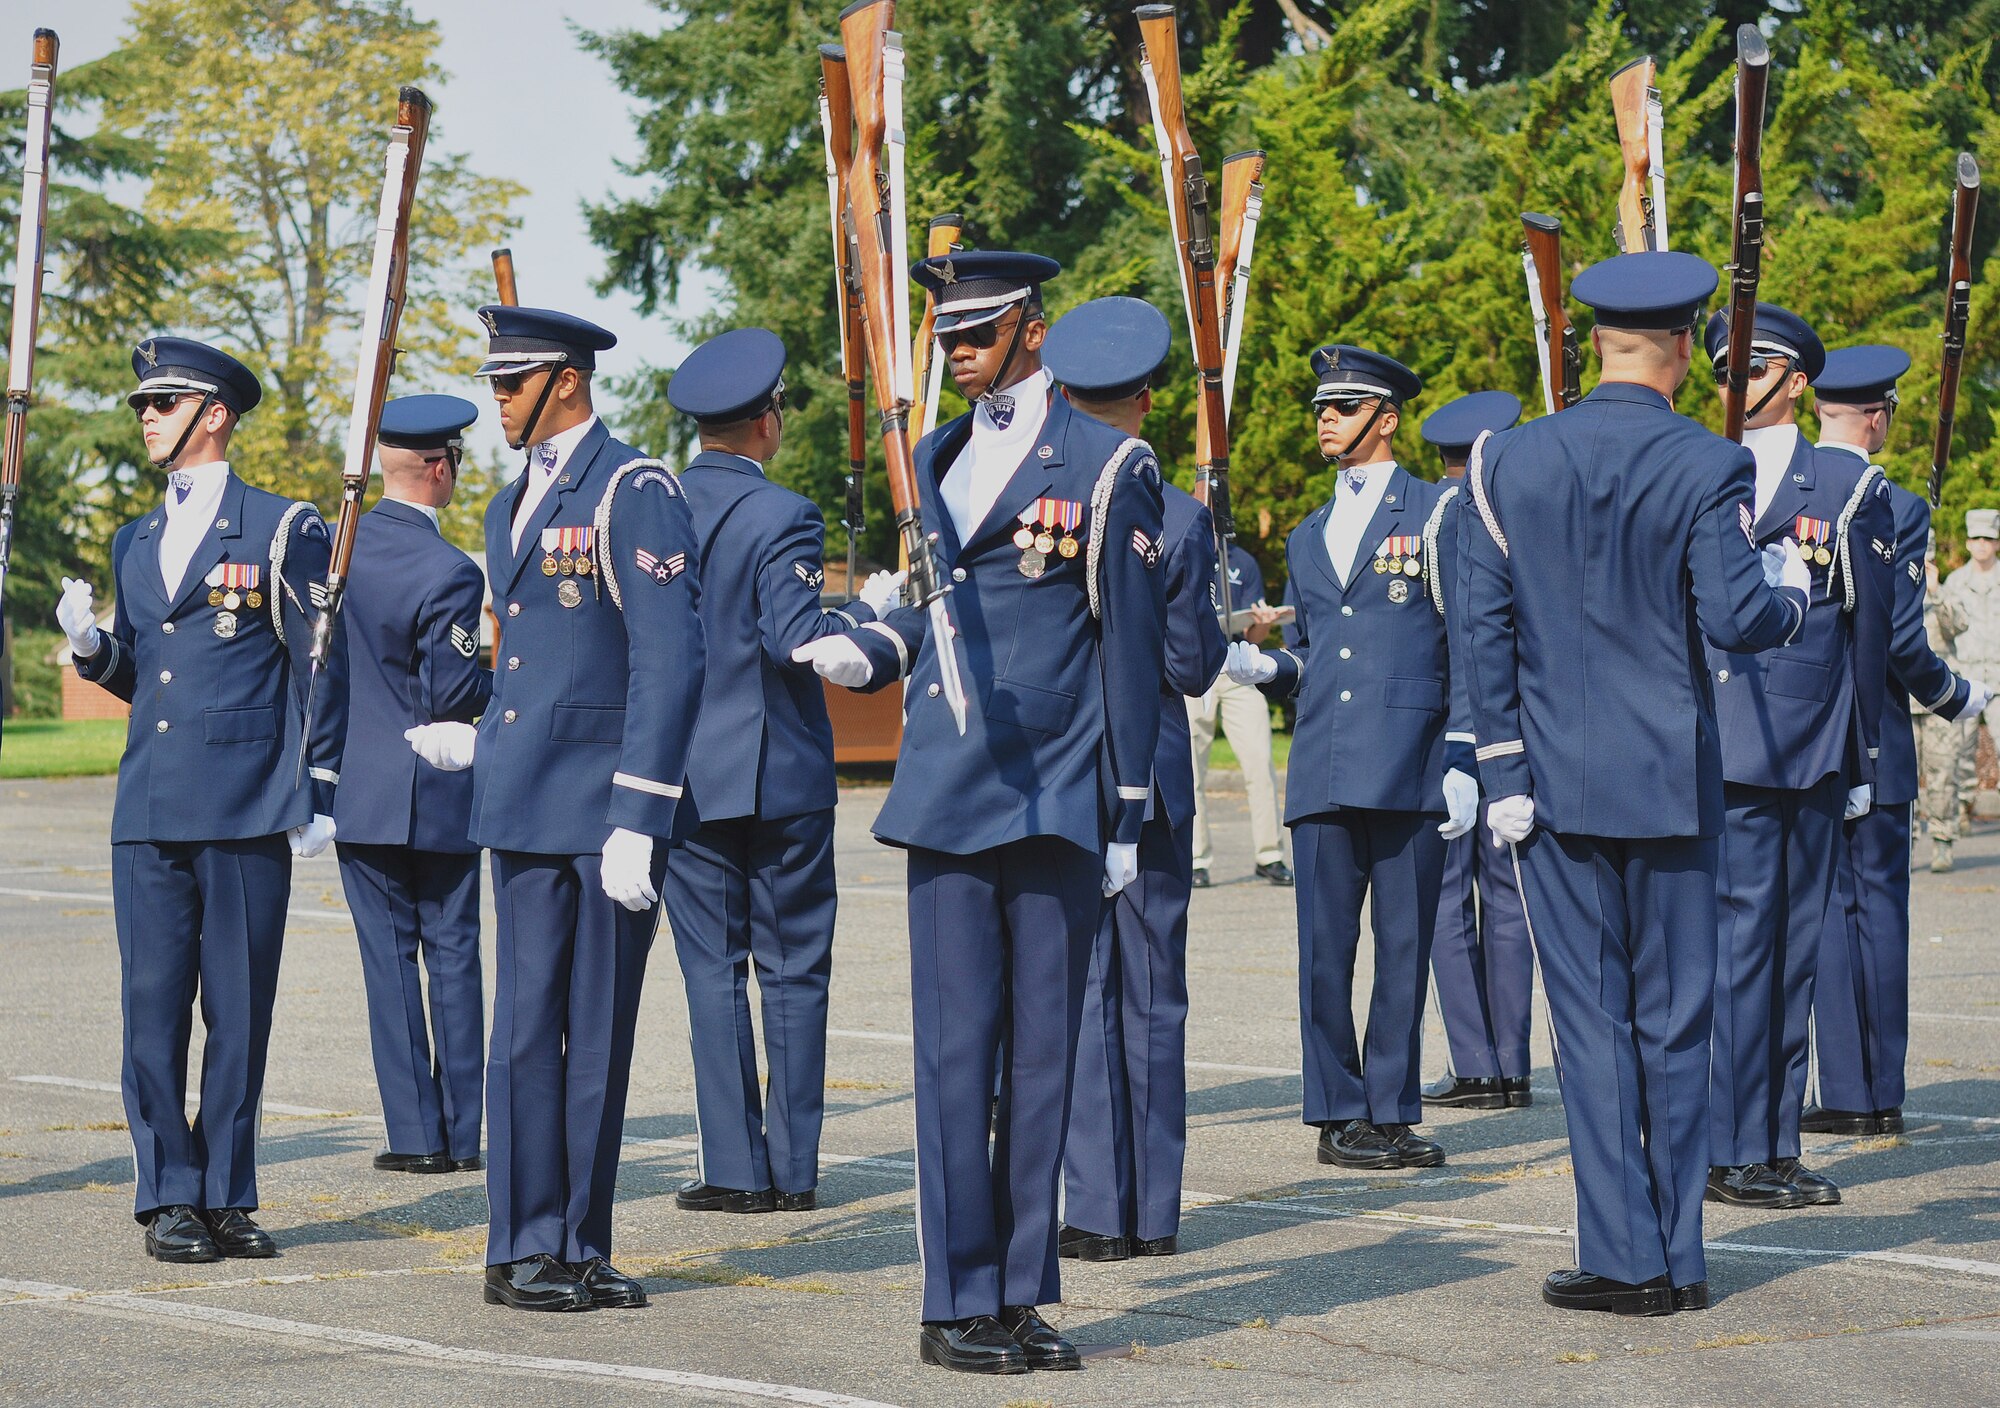 Members of the U.S. Air Force Honor Guard drill team perform for onlookers, Sept. 24, 2012, at Joint Base Lewis-McChord, Wash. The team stopped at JBLM on their tour around the country and performed many demonstrations around the area. (U.S. Air Force photo/Staff Sgt. Sean Tobin)